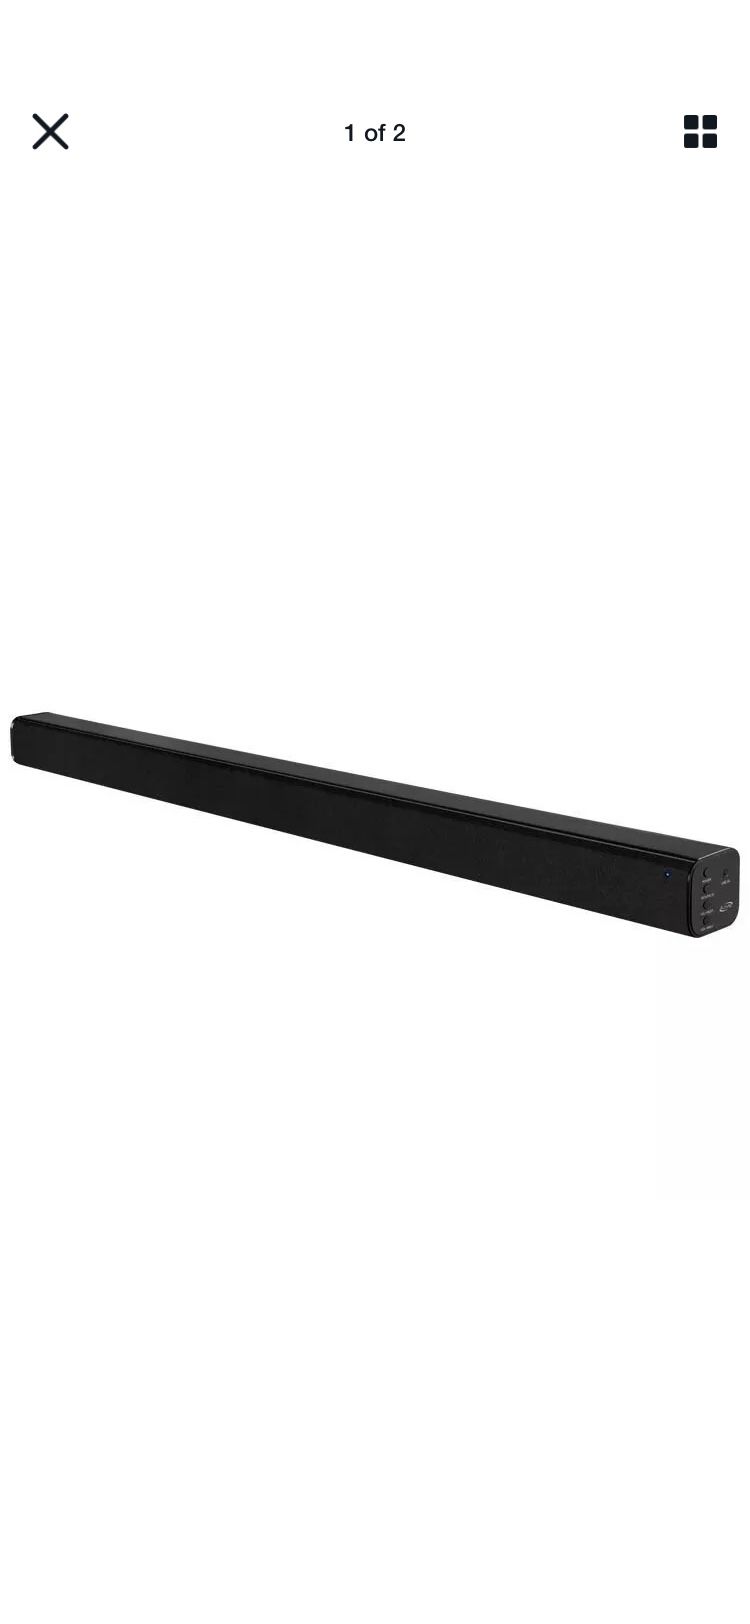 NEW iLive 37" HD Sound Bar with Bluetooth Wireless for any TV NIB new never used ,with remote.